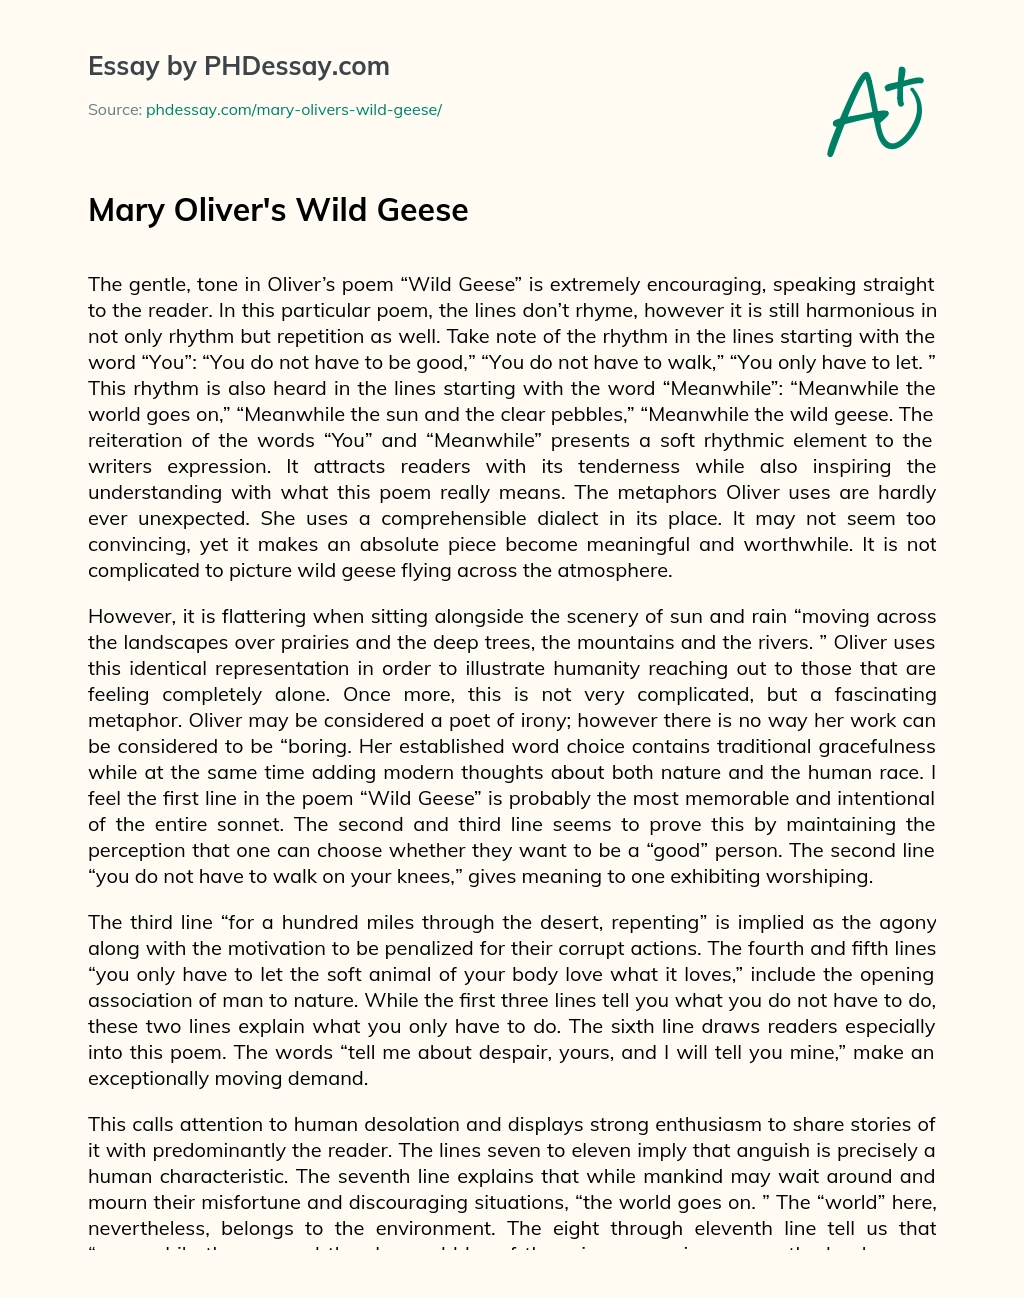 Mary Oliver’s Wild Geese essay